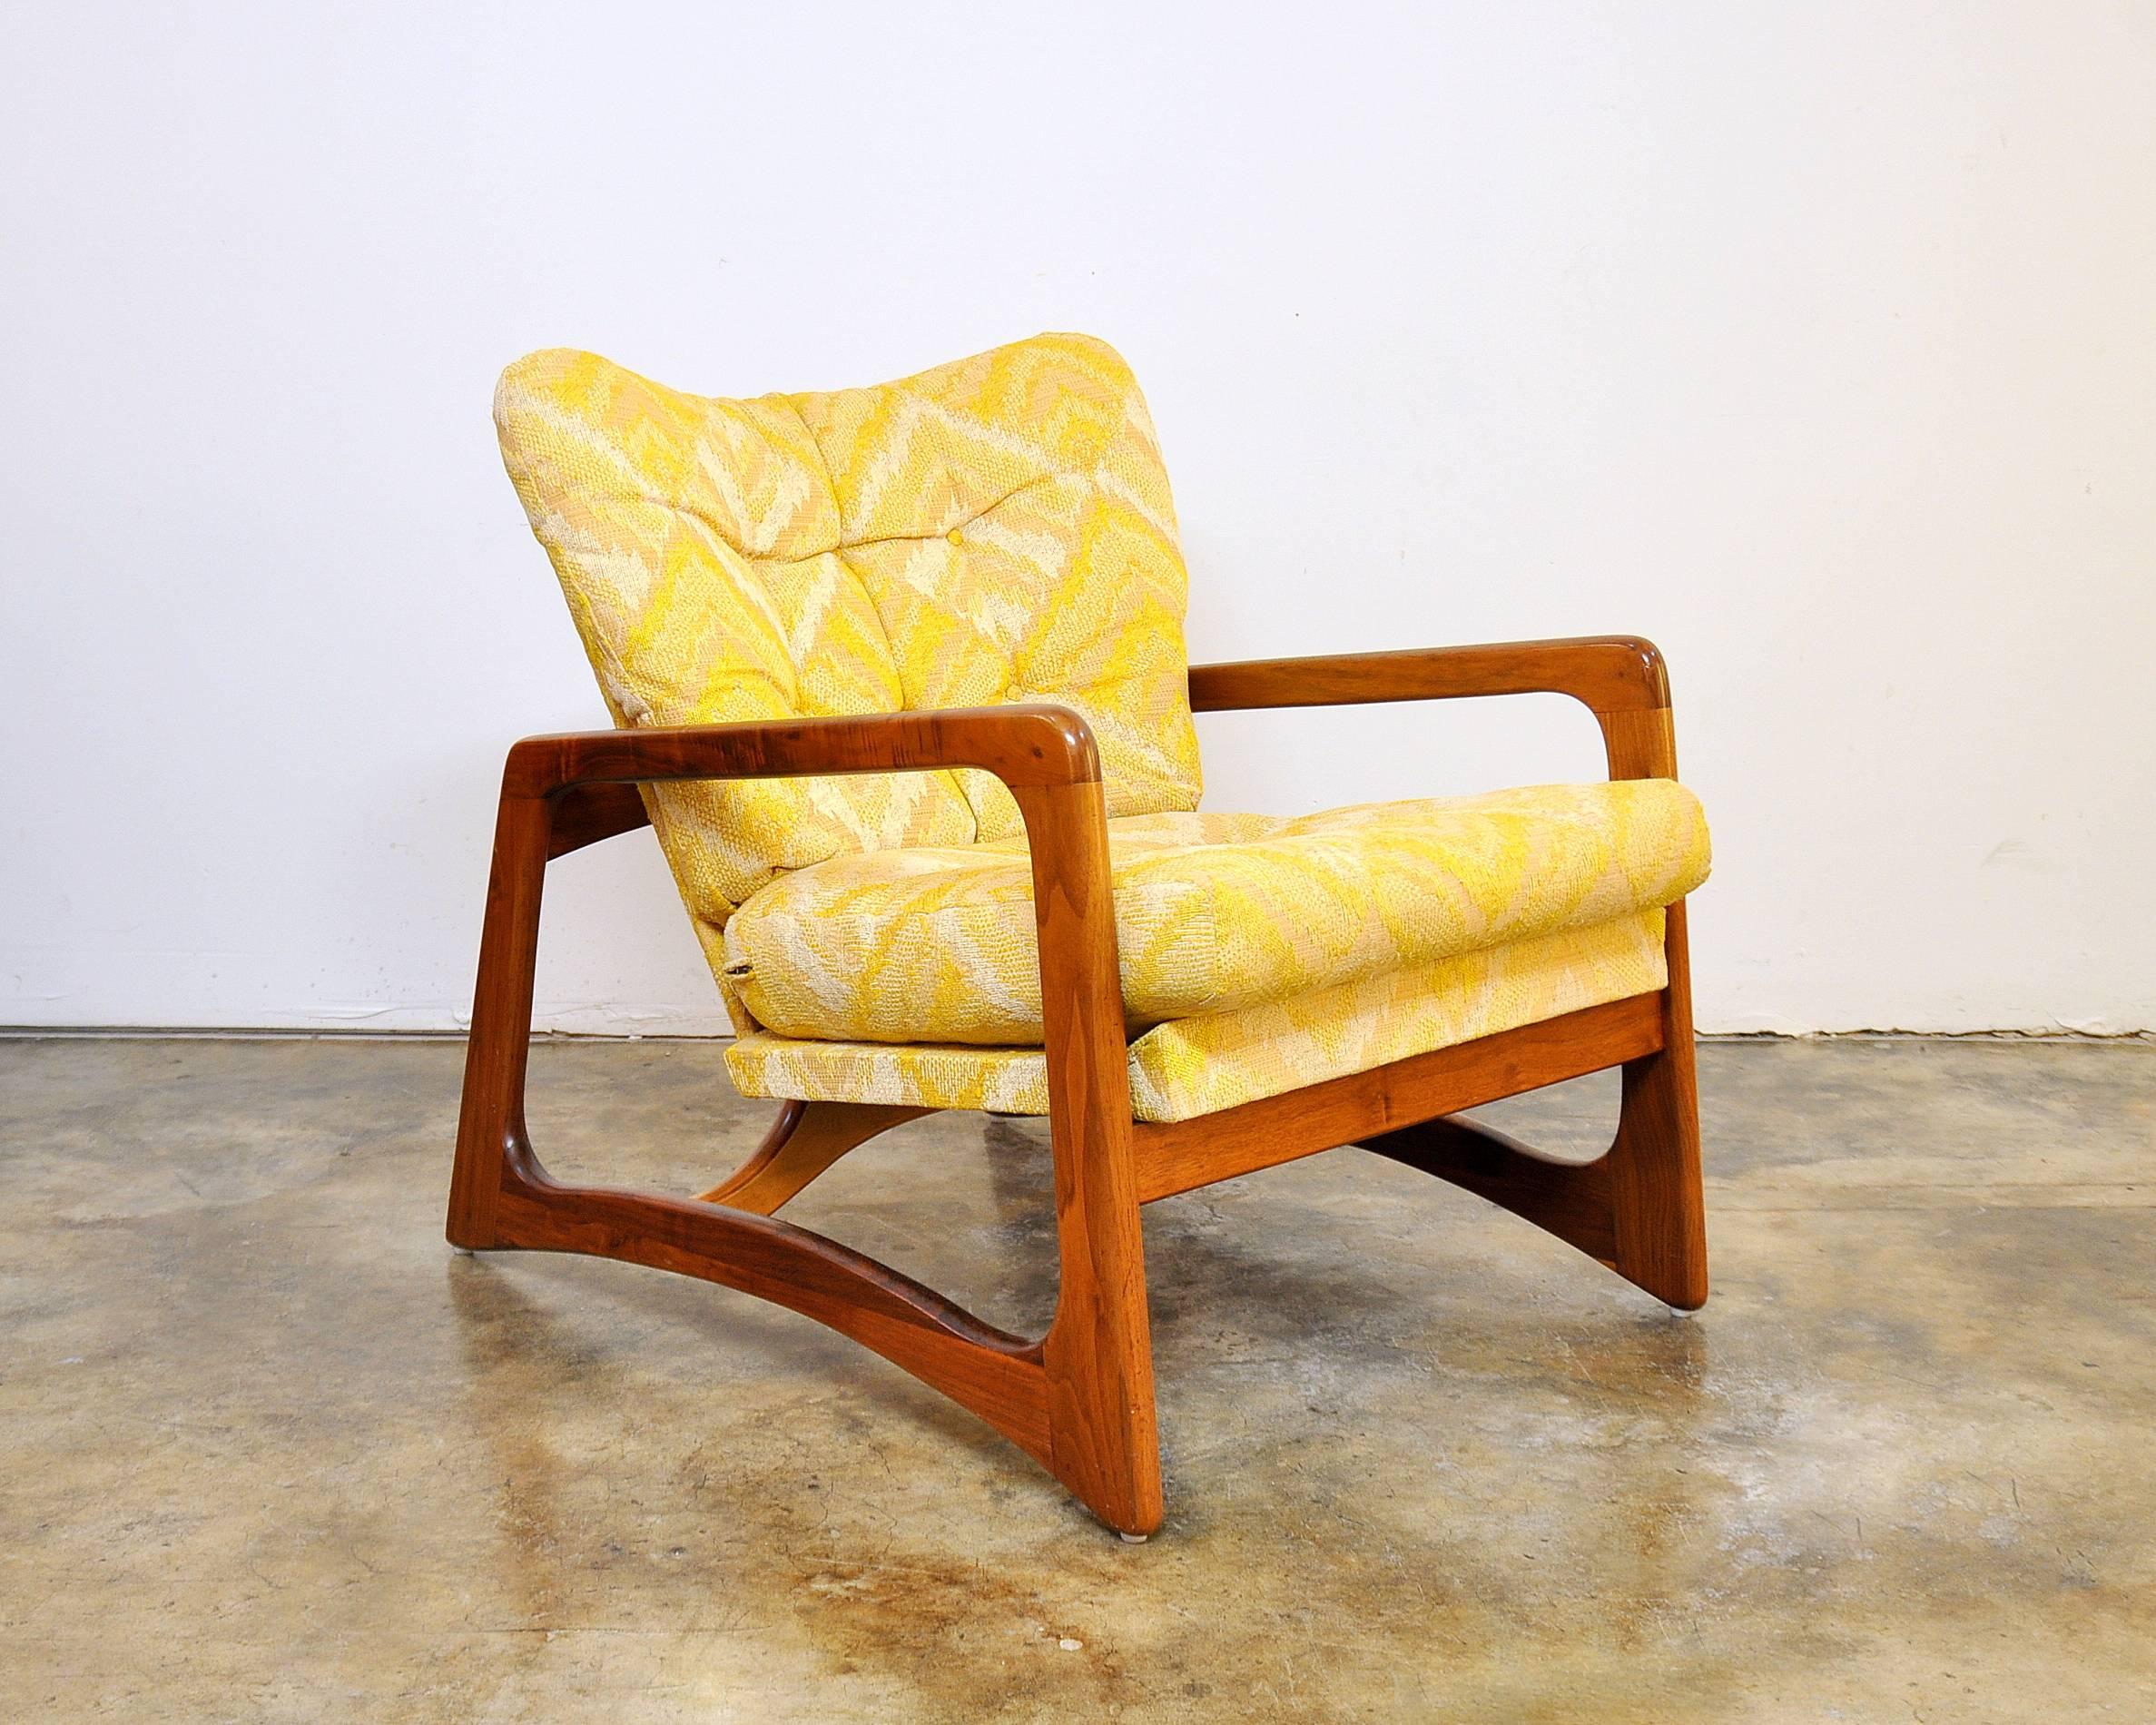 Mid-Century Modern armchair featuring a gorgeously grained sculpted walnut biomorphic frame, a quintessential characteristic of legendary, hall of fame designer Adrian Pearsall. The frame is in pristine, refinished condition. The chair retains its